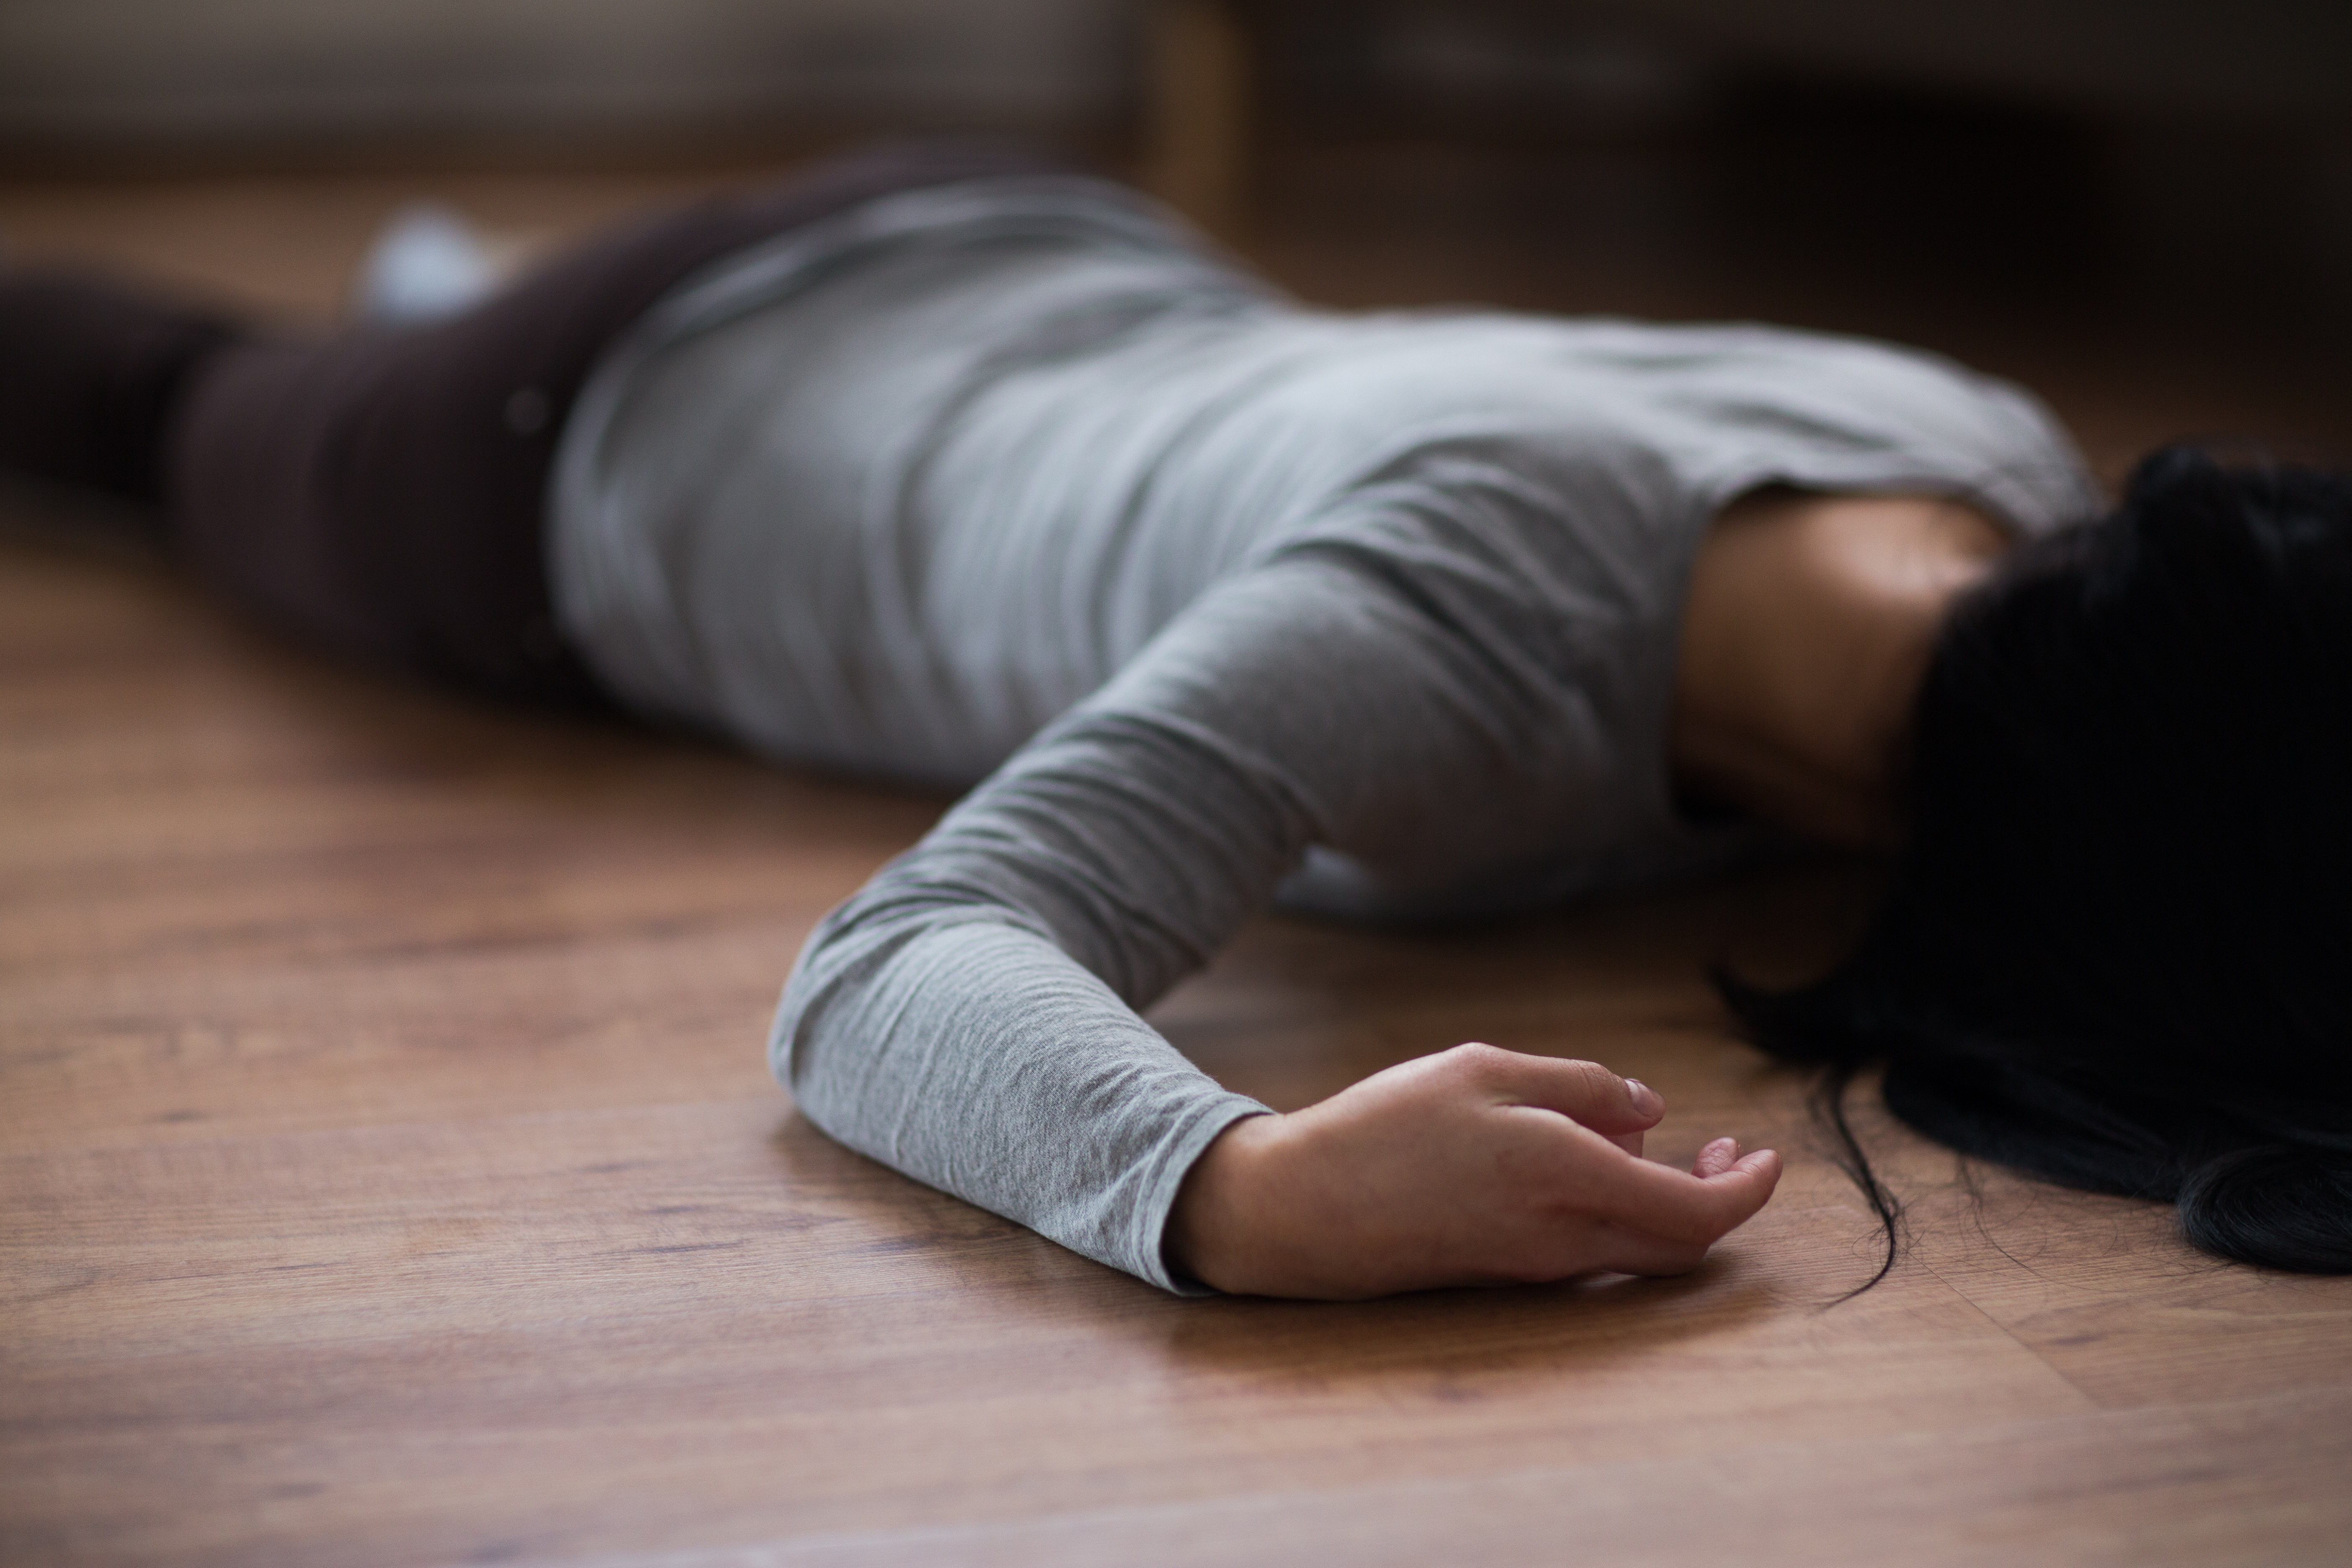 Unconscious woman on the ground | Source: Shutterstock.com